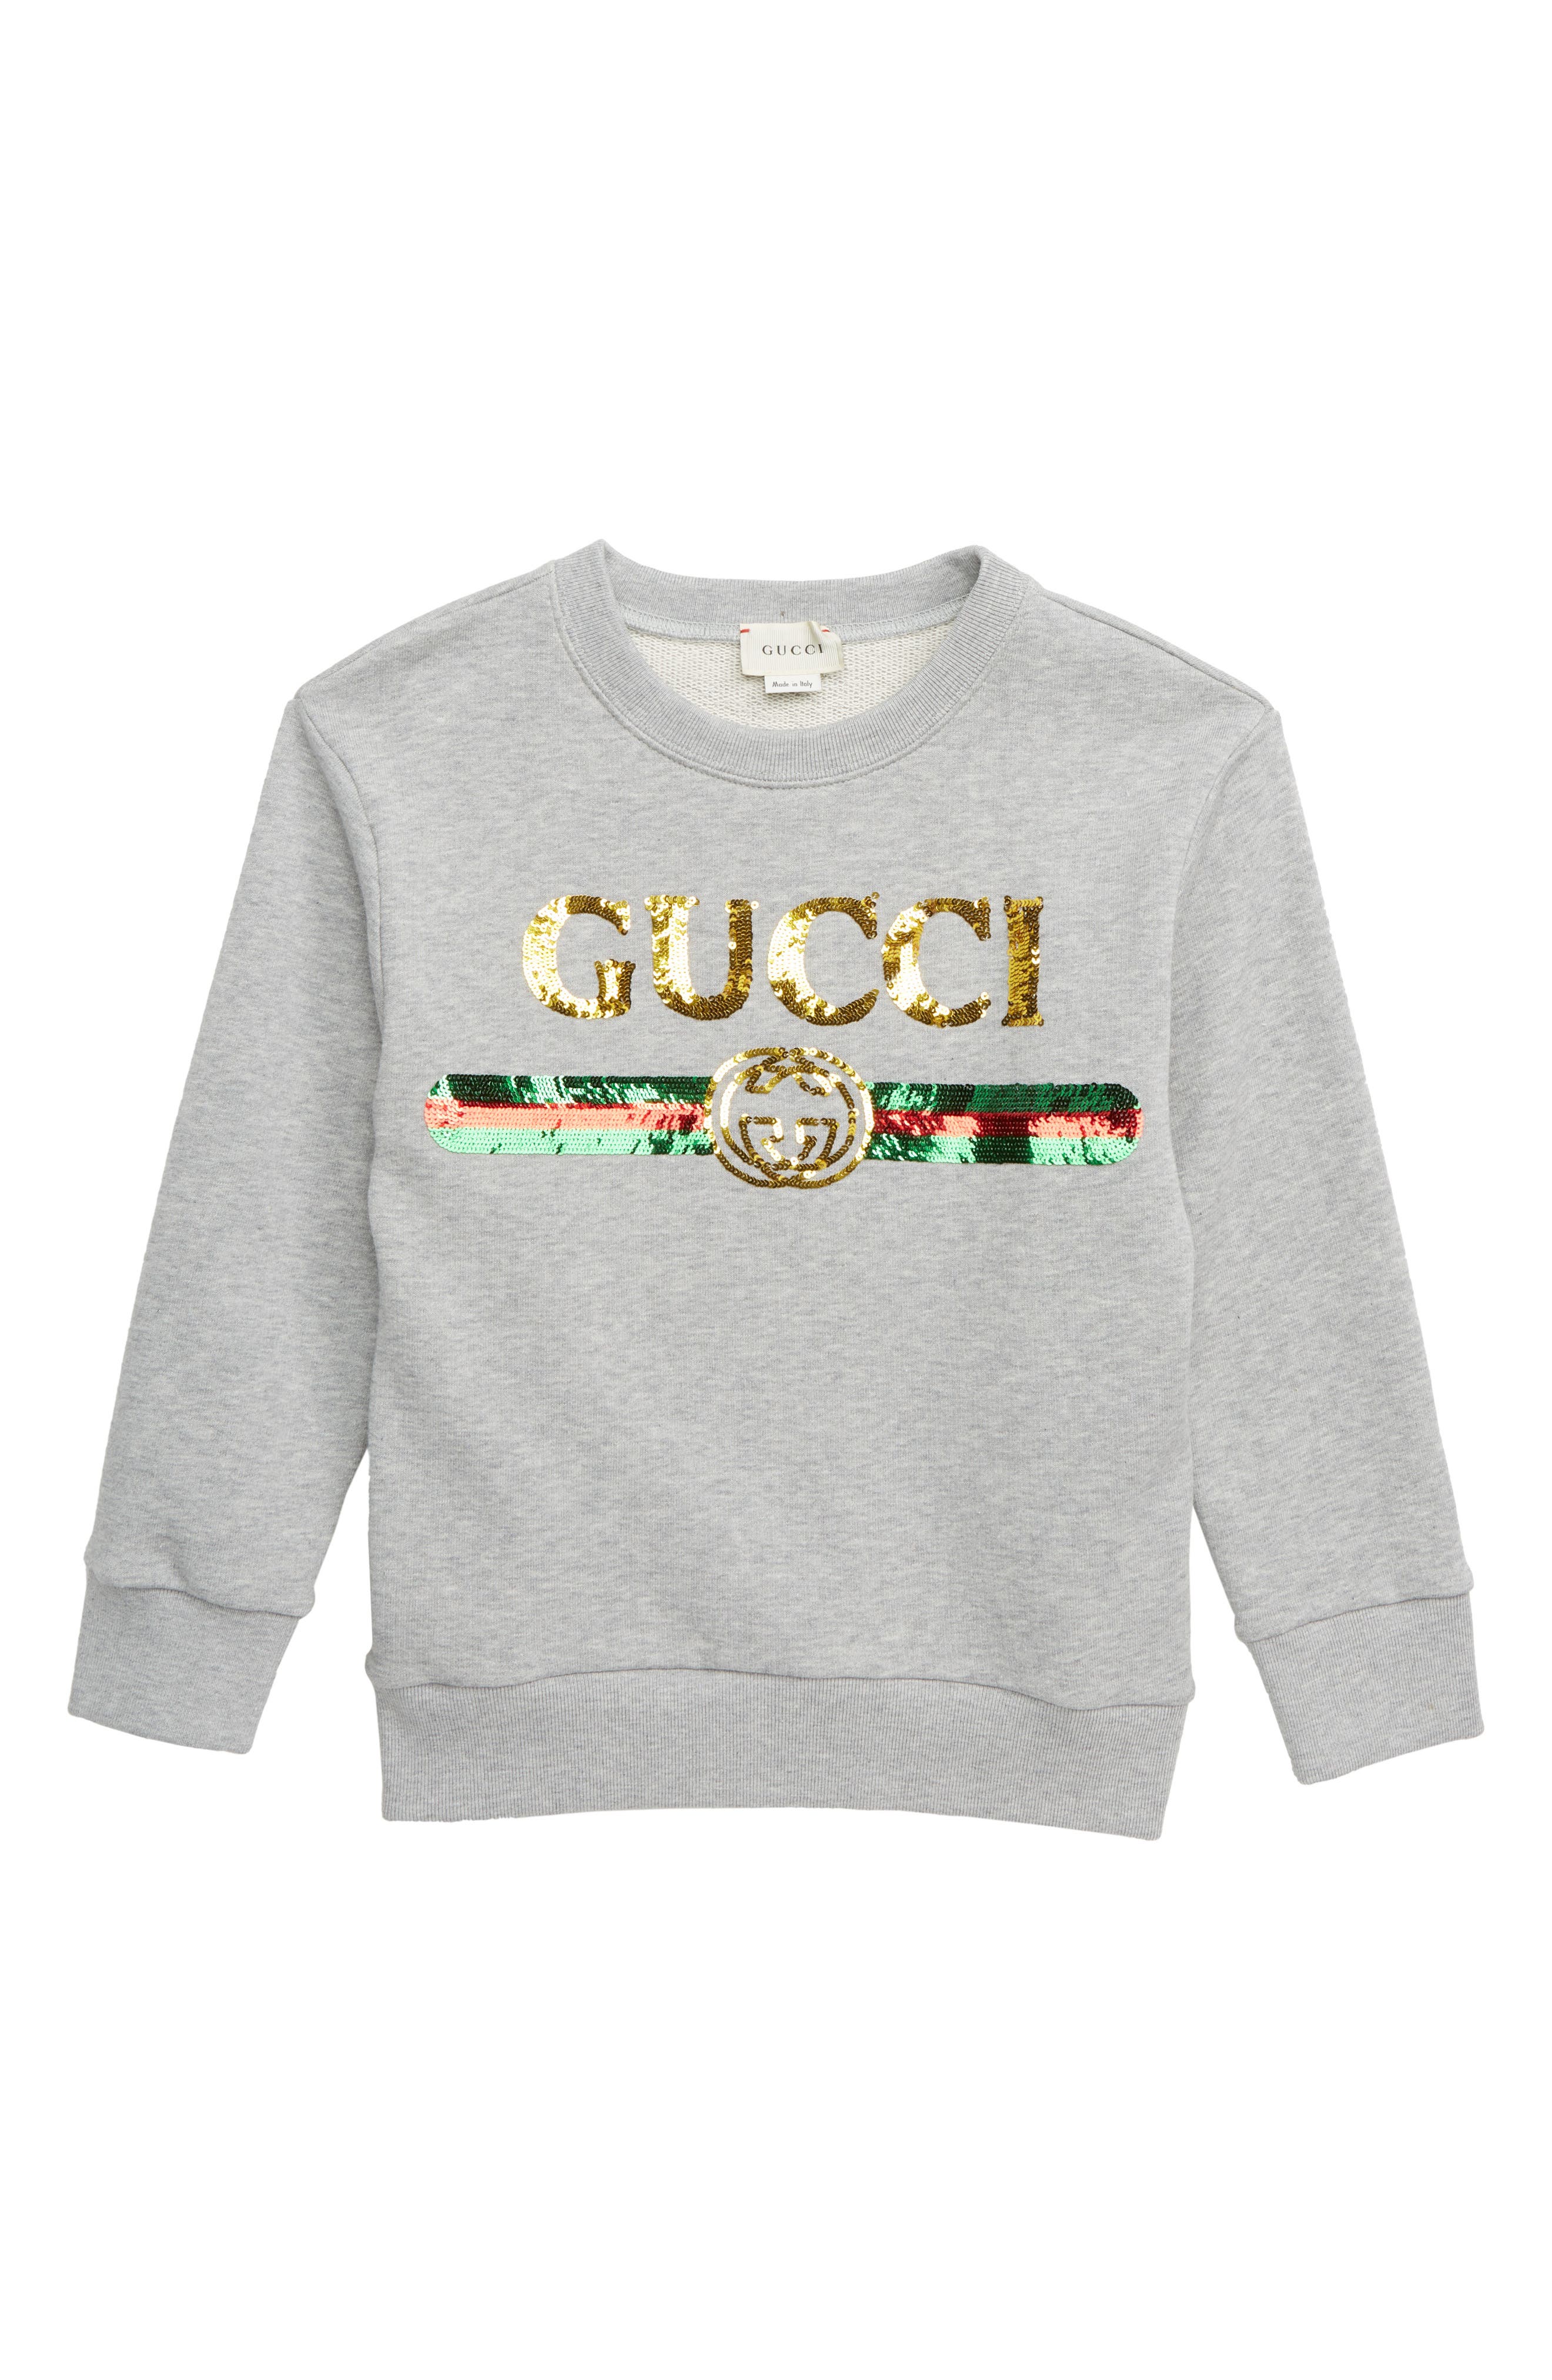 girls gucci t shirt, OFF 72%,welcome to 